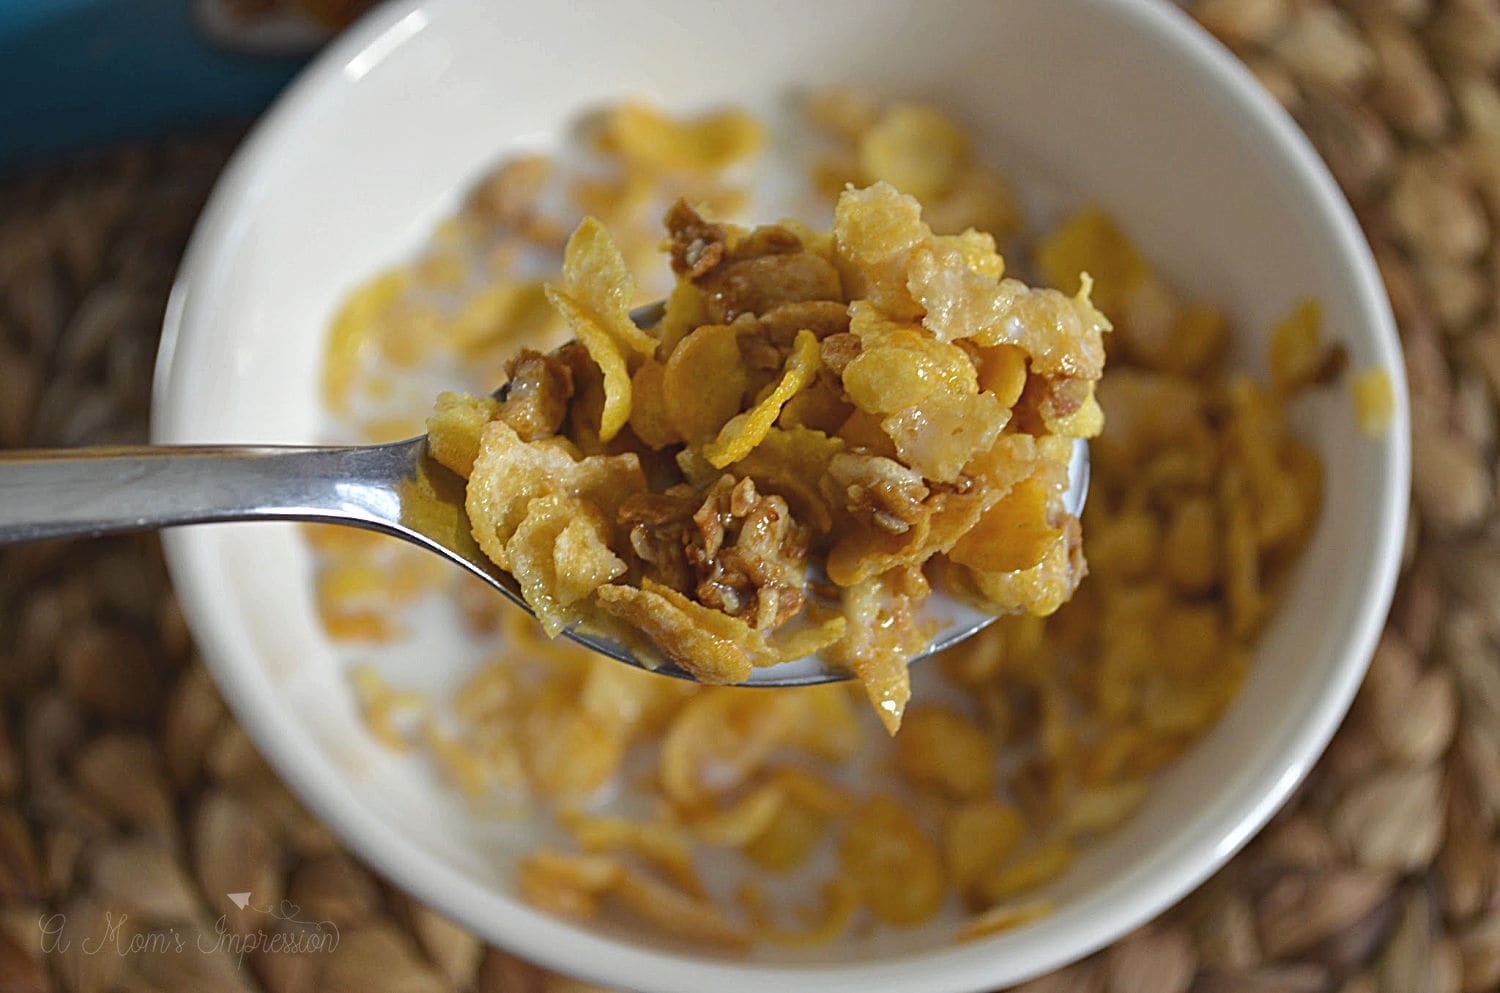 Bowl of frosted honey bunches of oats